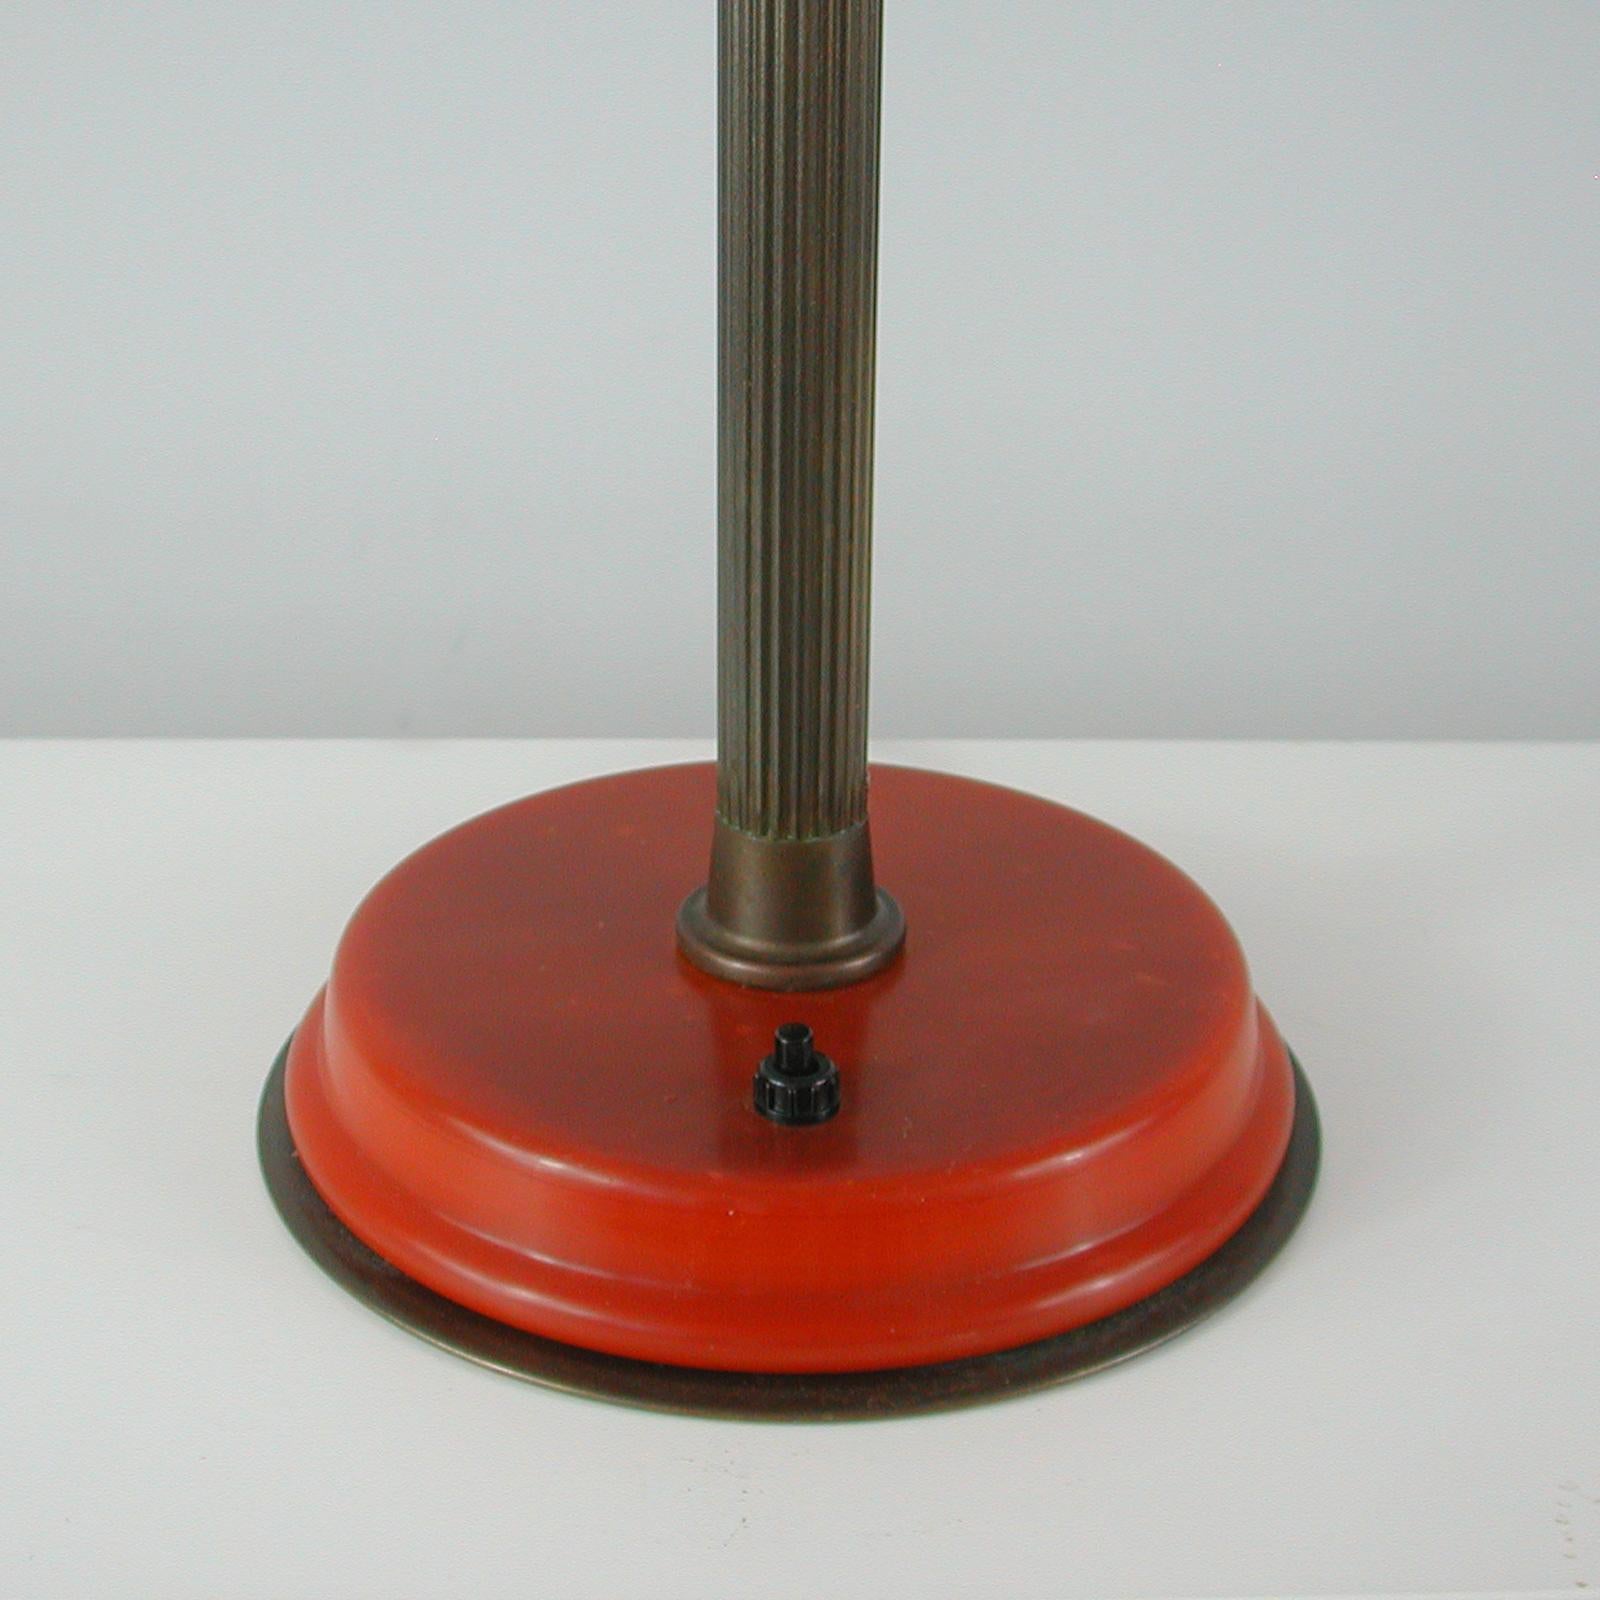 German Art Deco Height Adjustable Bronzed Brass and Bakelite Table Lamp, 1930s For Sale 4